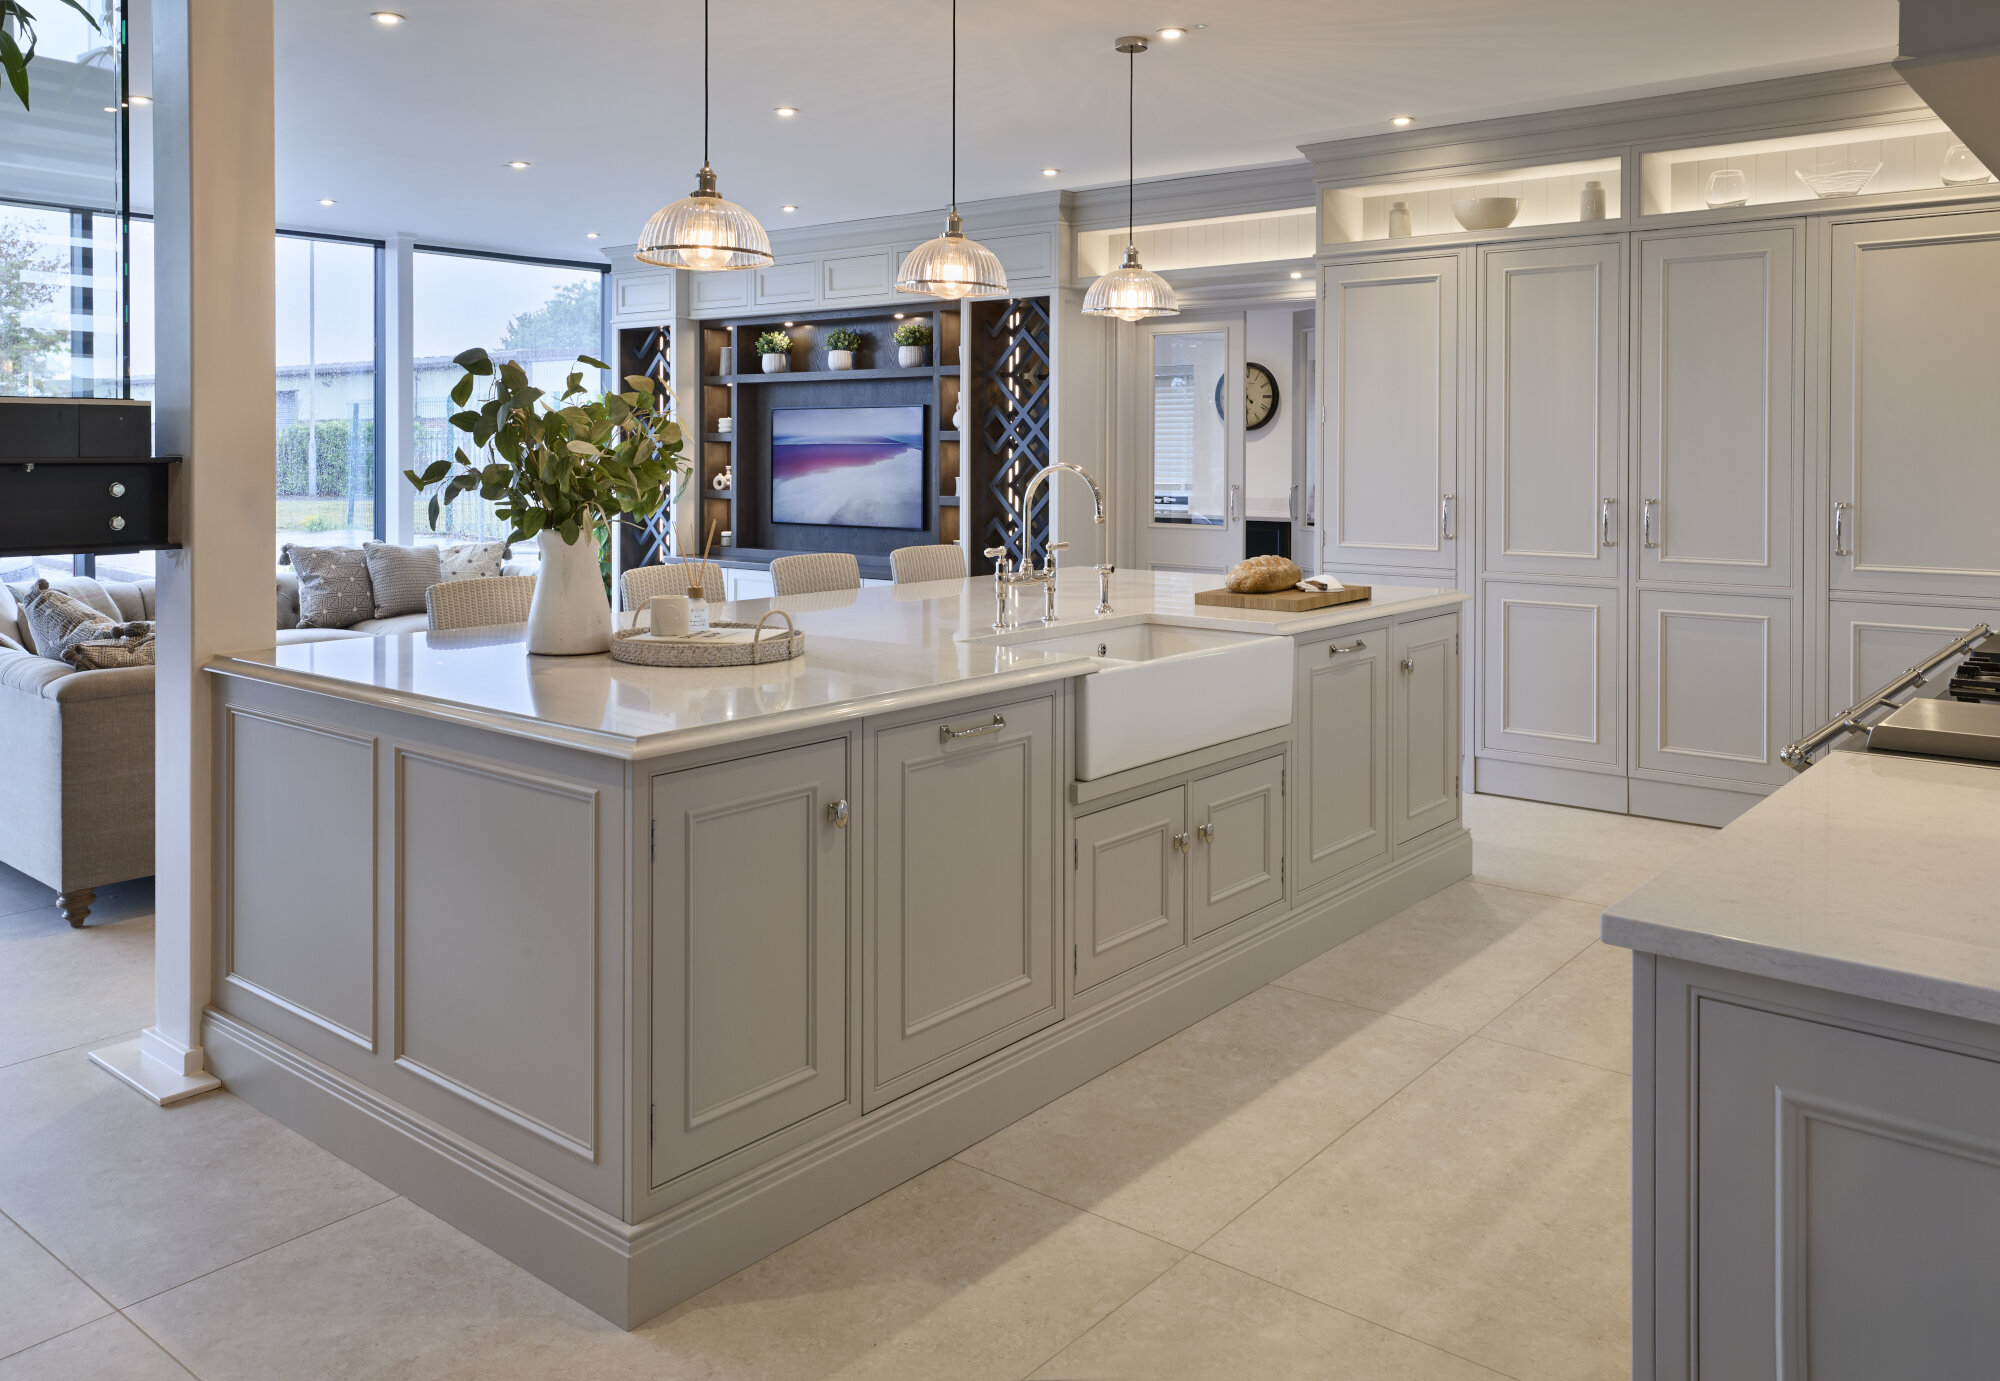 This Bespoke Kitchen Design is on display in our showroom near Cotgrave